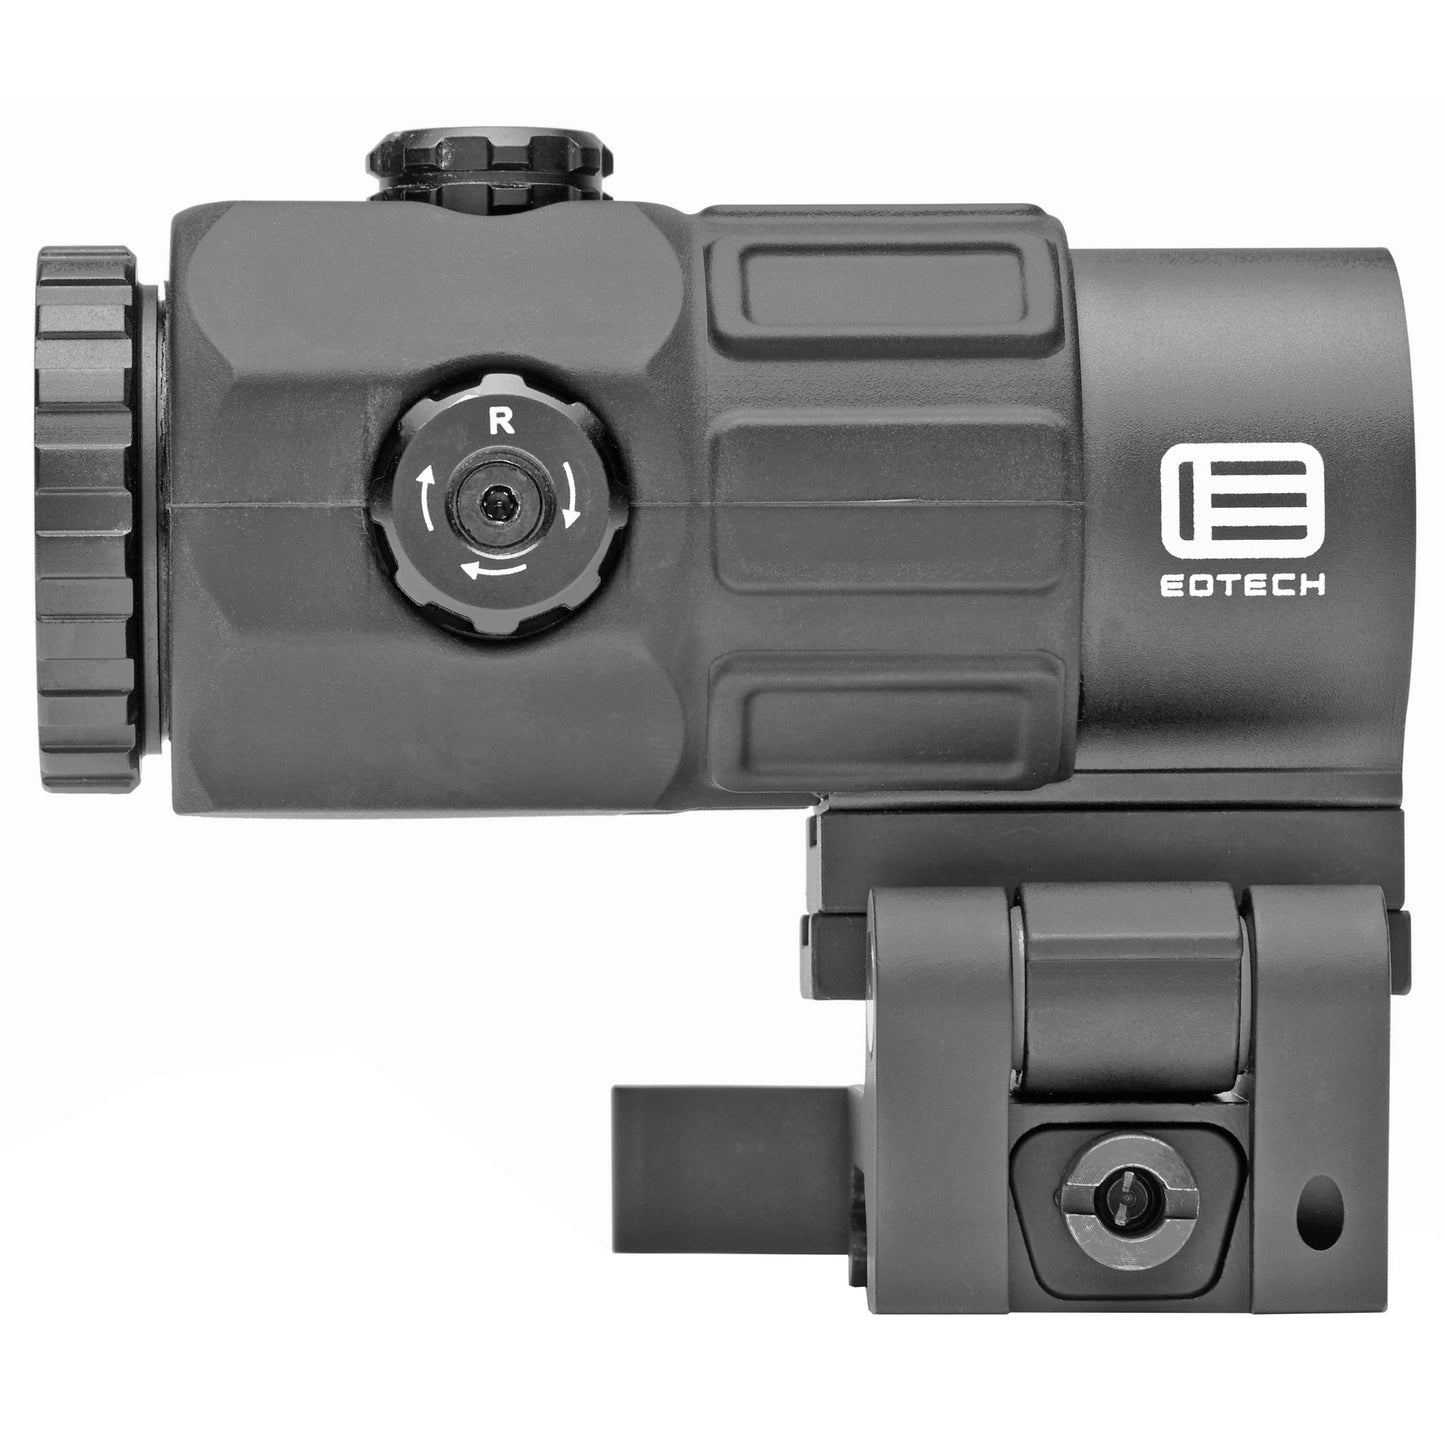 EOTech, G45, Magnifier, 5X, QD Mount, Switch to Side, Tool-Free Vertical and Horizontal Adjustments, Black Finish, 34mm